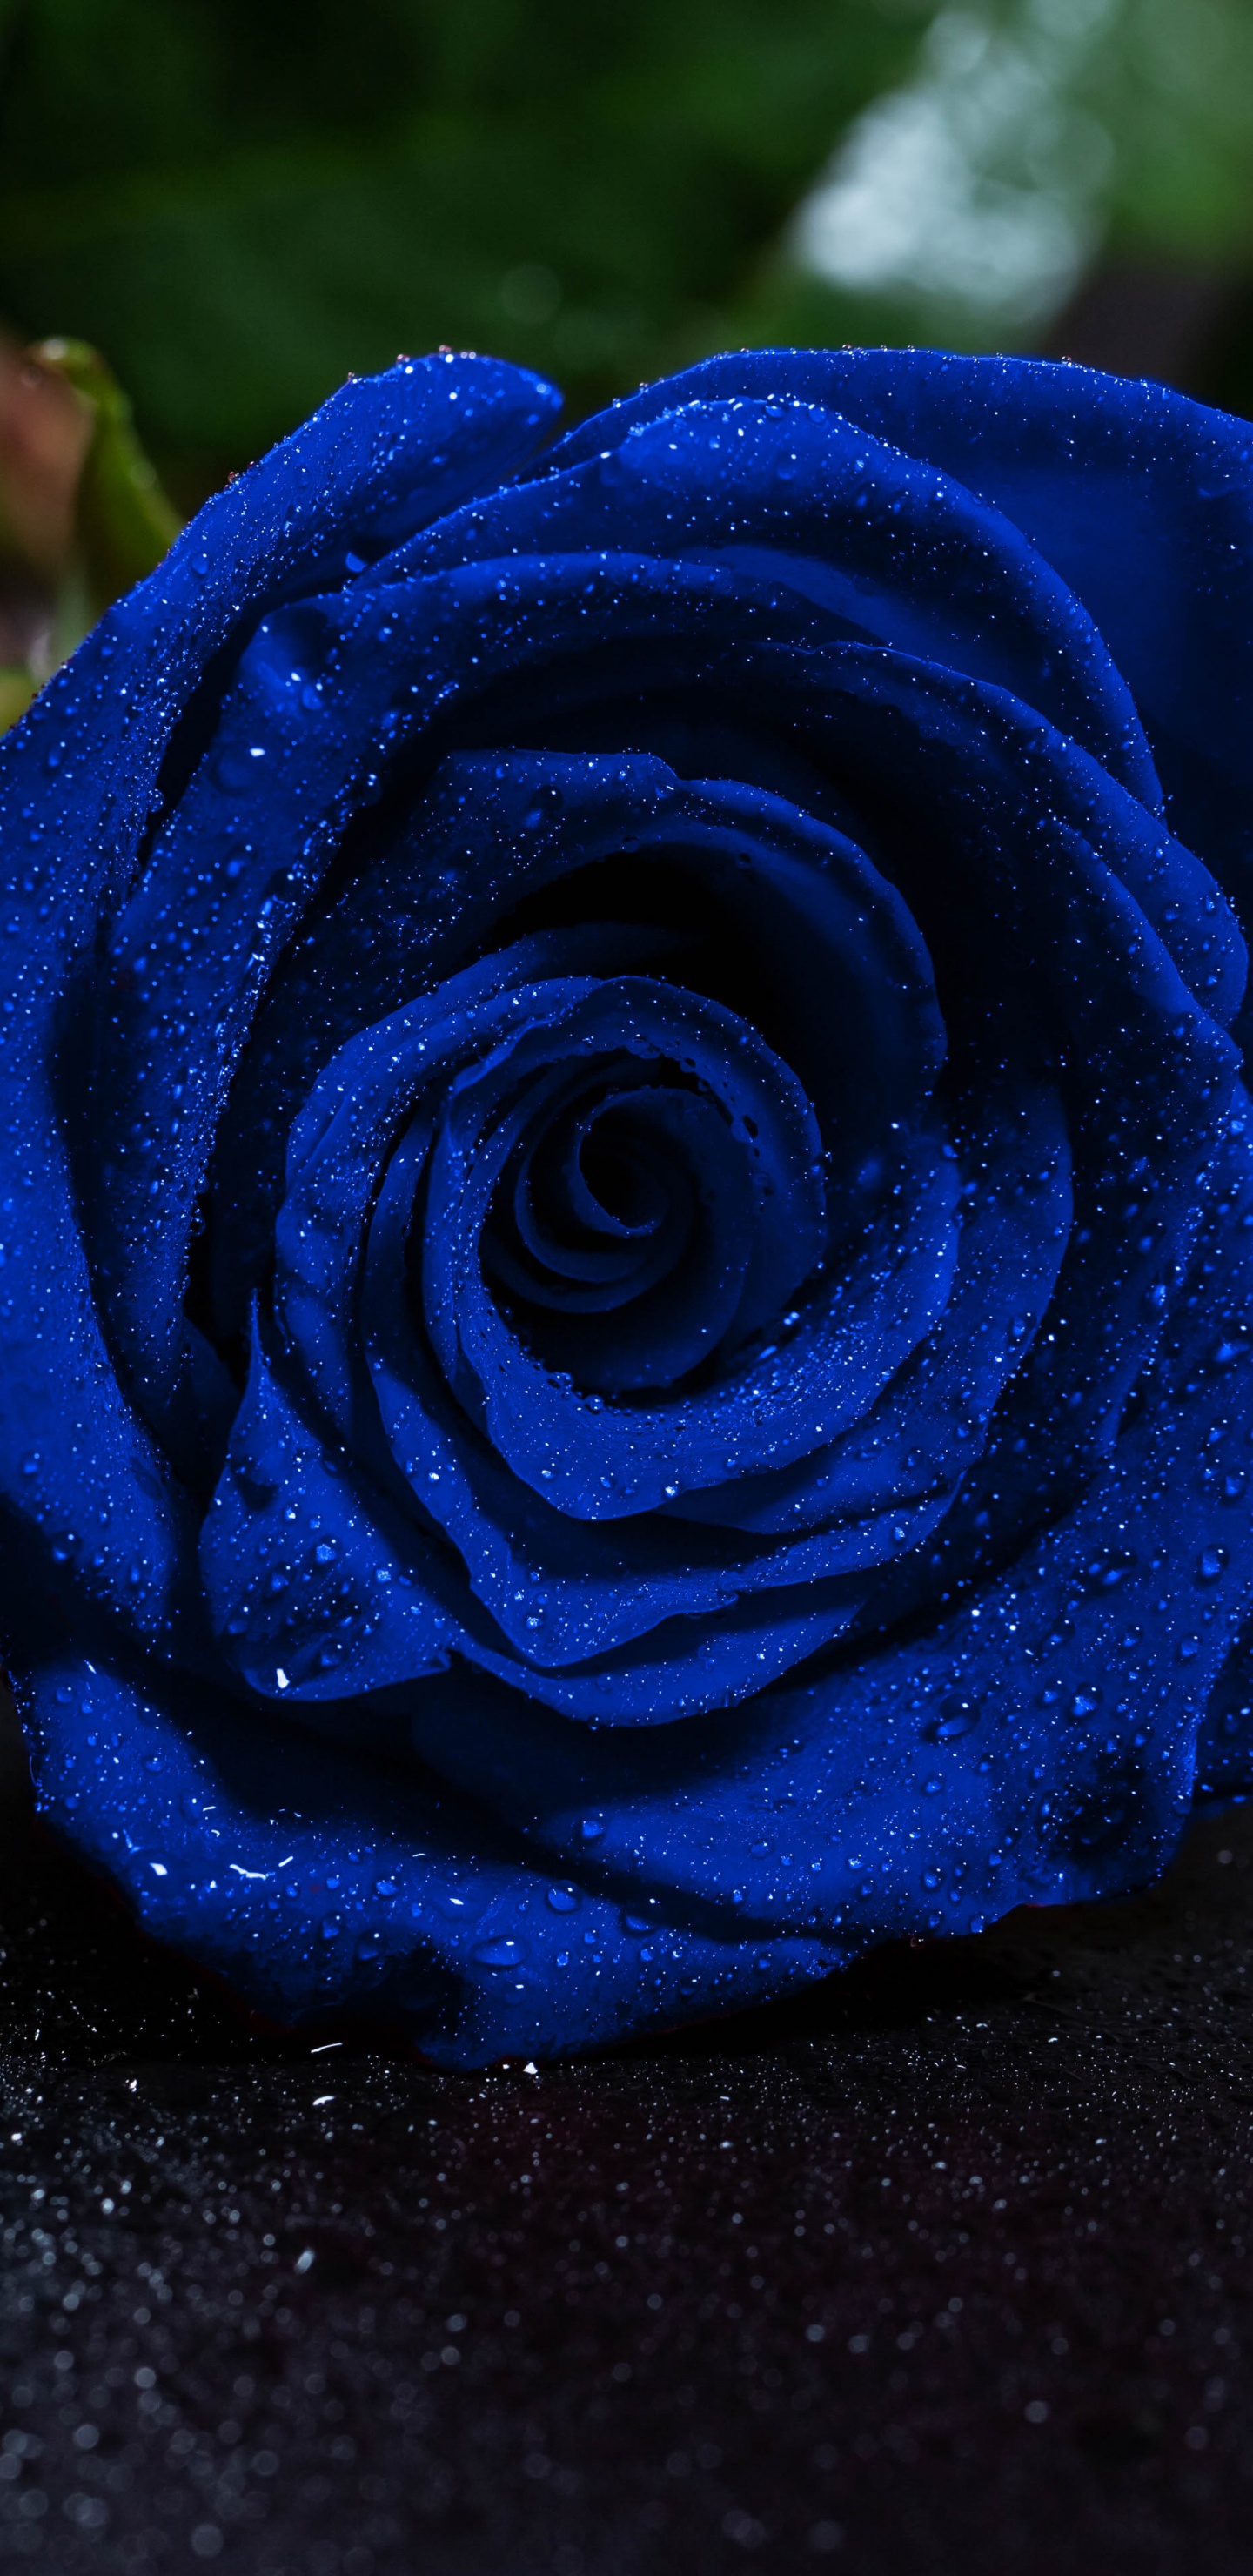 Blue Rose on Black Surface. Wallpaper in 1440x2960 Resolution